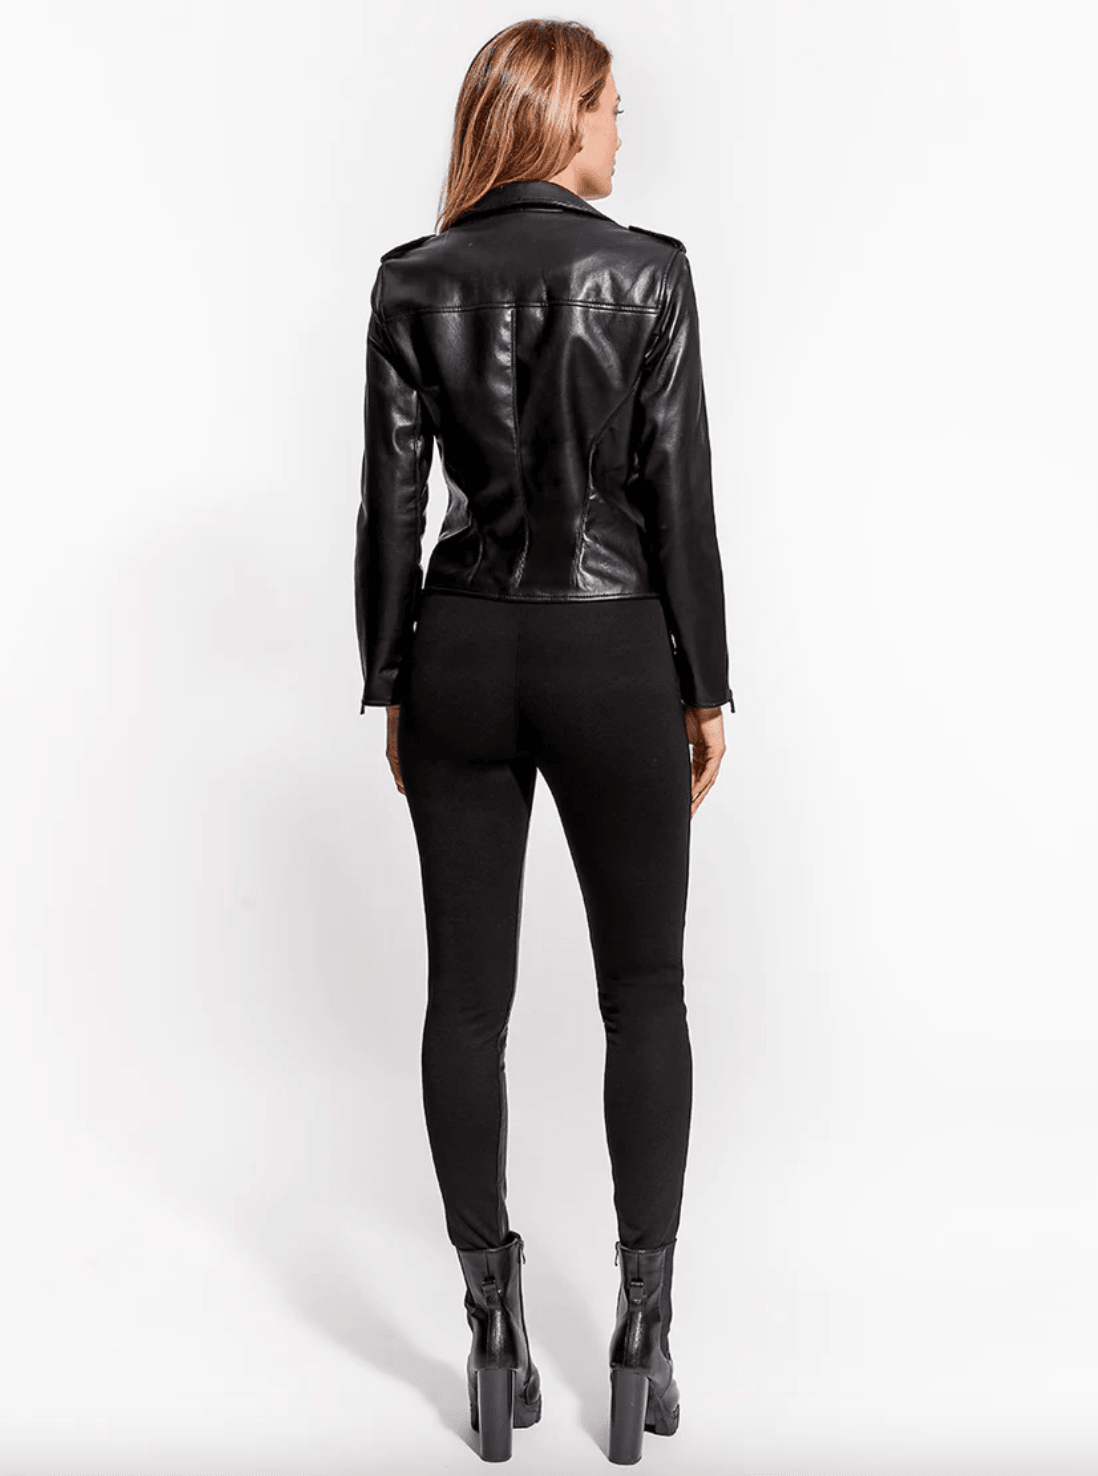 Cult Recycled Leather Jacket in Black by AS by DF - Haven